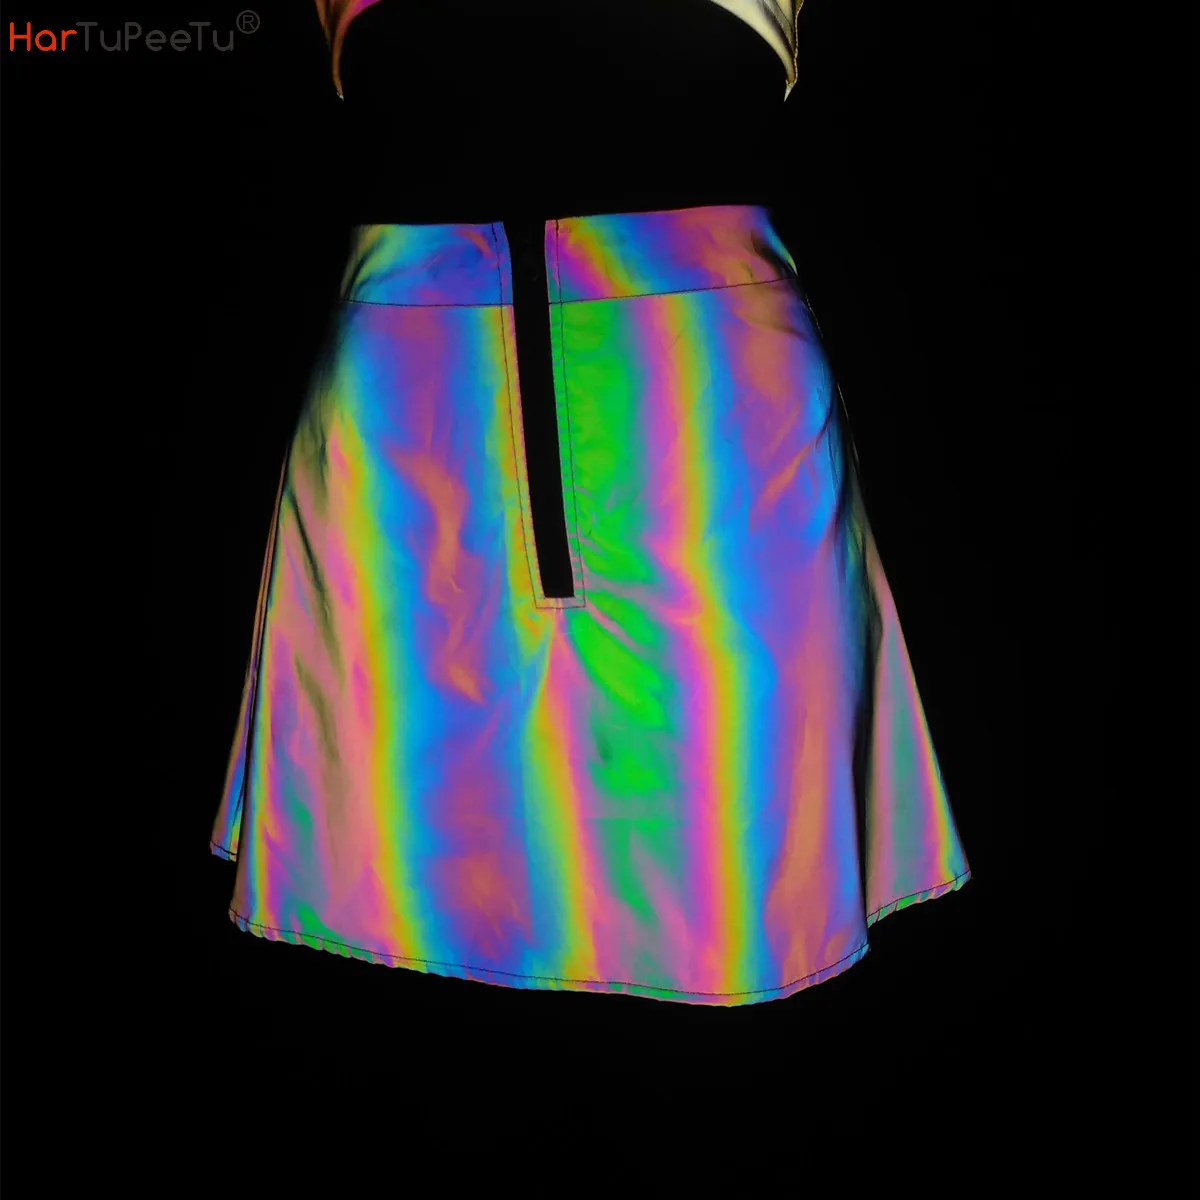 Women Sexy Shiny Colorful Reflective Nightclub Hip Hop Dance Short Skirt Middle Zipper Singer Rave Stage Outfit Show Wear